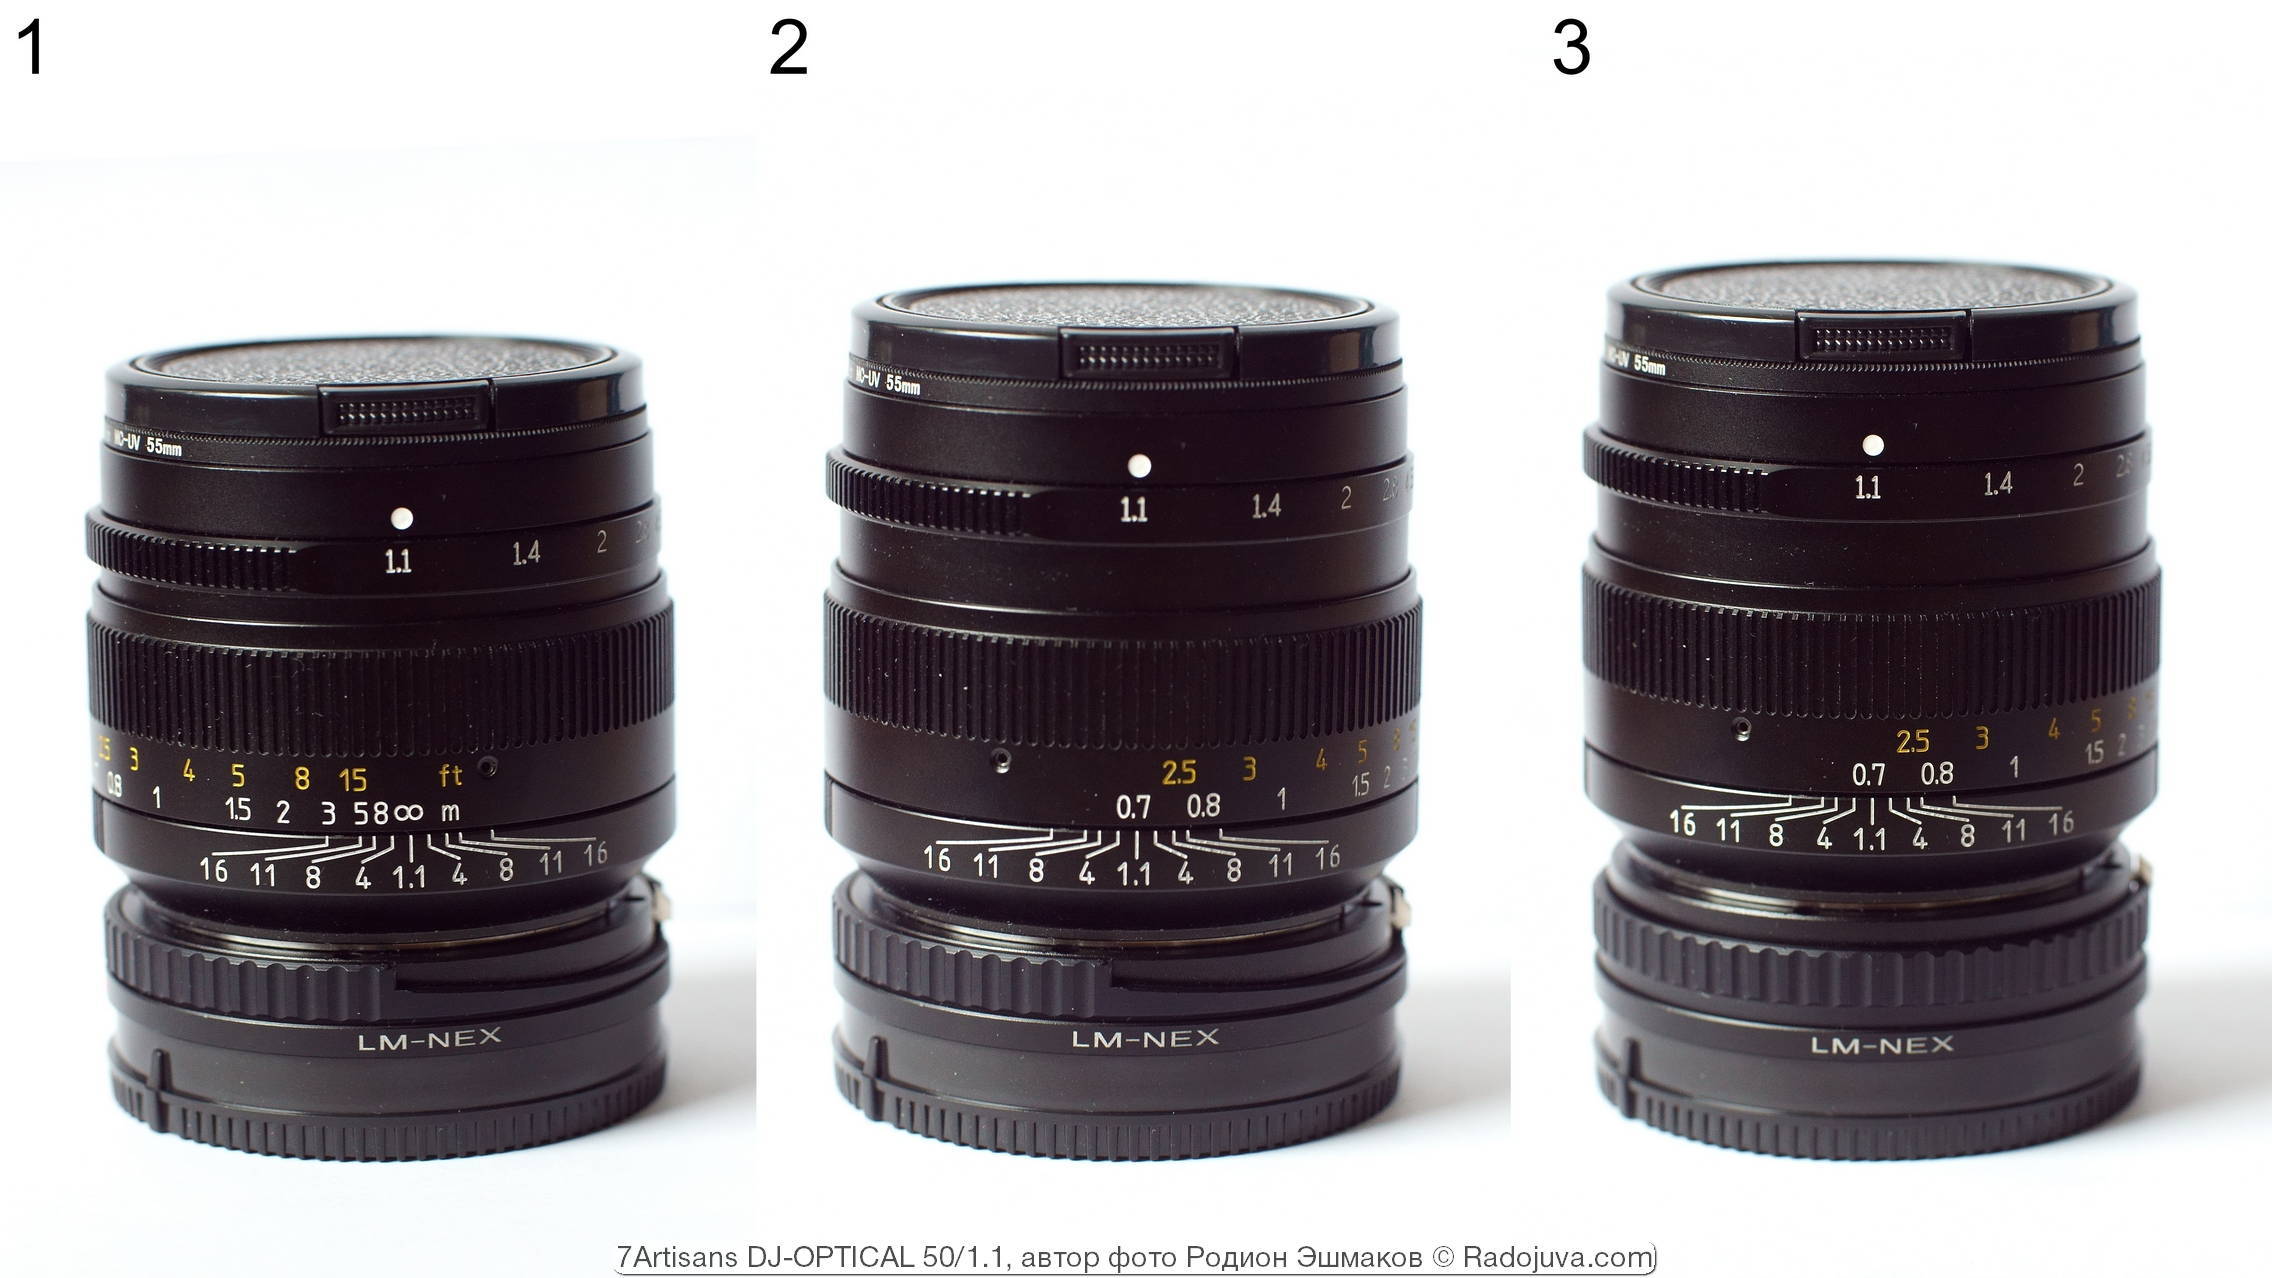 Changing the dimensions of 7artisans when focusing: 1 - focus to infinity, 2 - focus on the MDF with the lens helicoid, 3 - focus on the MDF with the lens helicoid and the LM-NEX adapter.